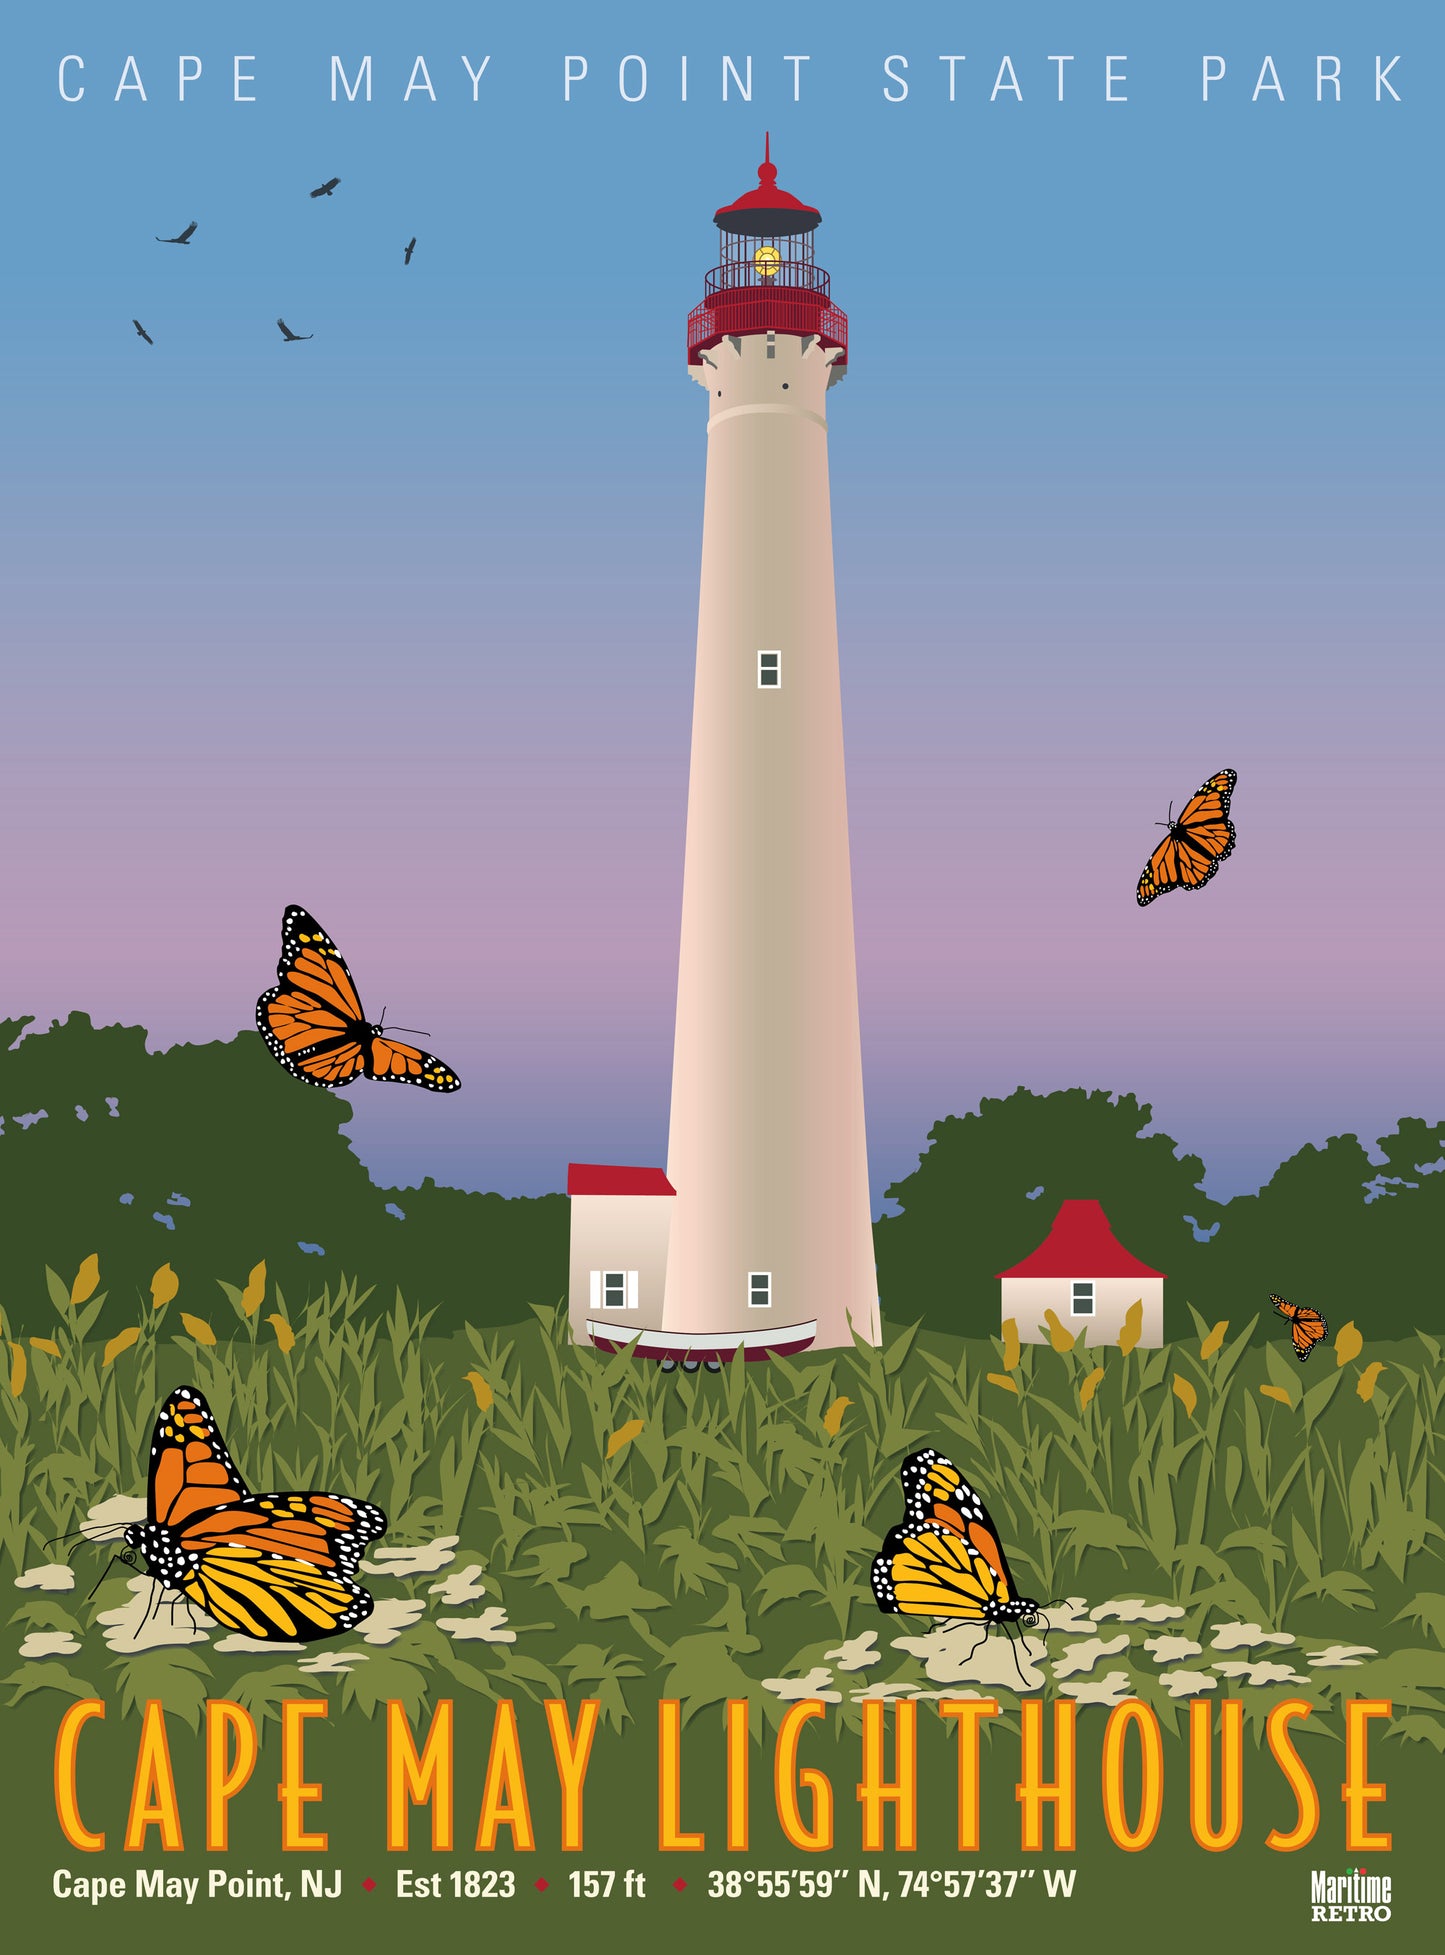 Cape May Lighthouse Monarch Print